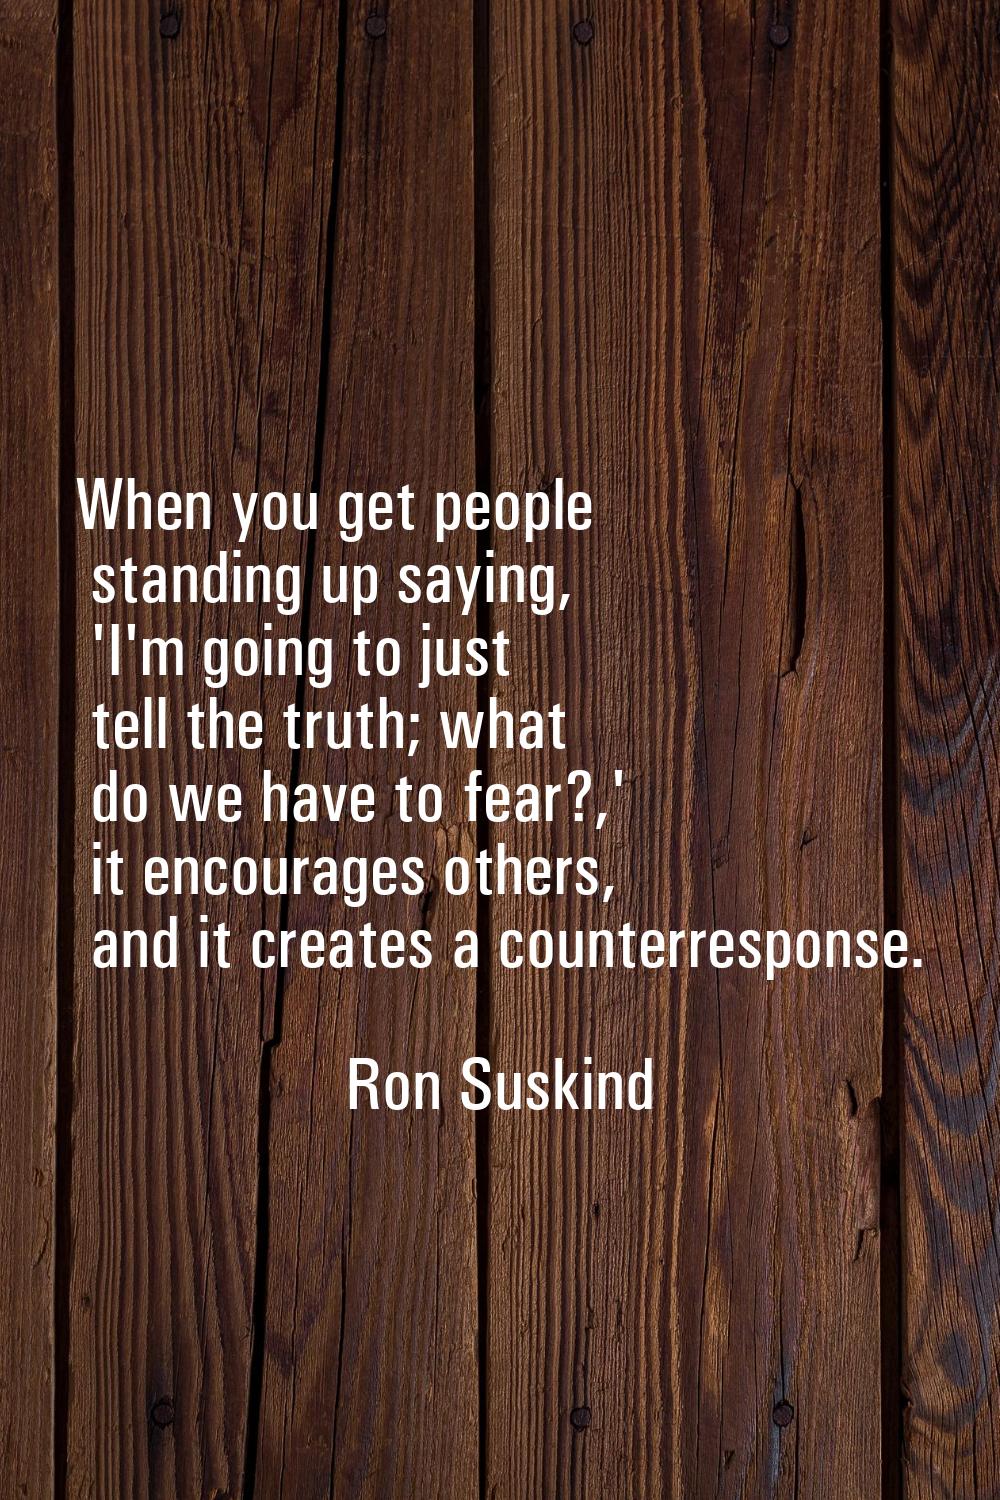 When you get people standing up saying, 'I'm going to just tell the truth; what do we have to fear?